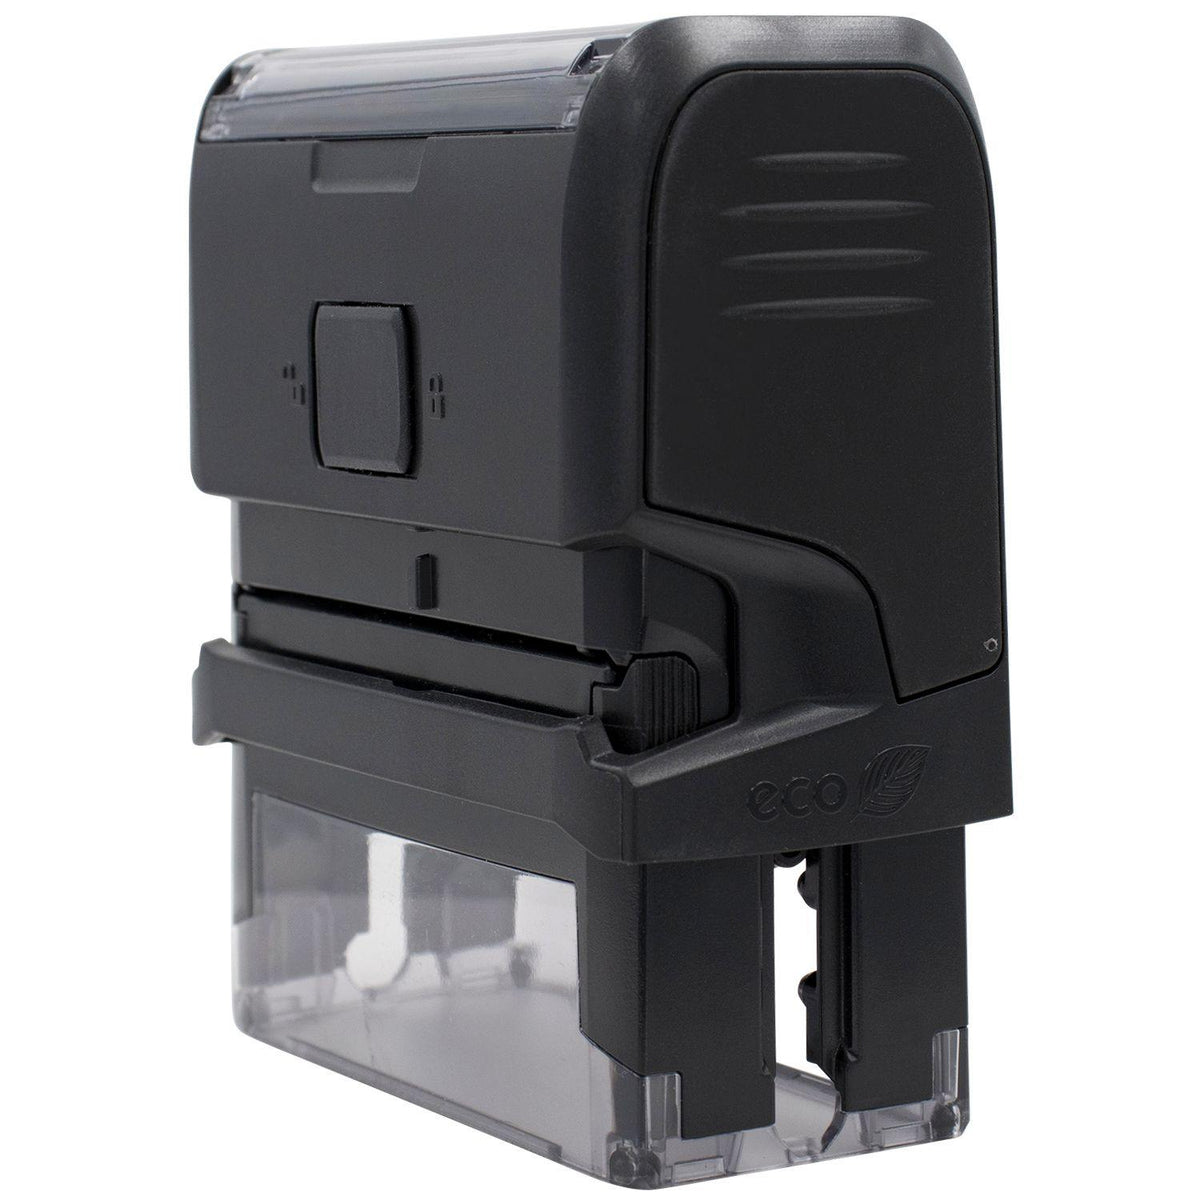 Large Self-Inking Urgente Stamp - Engineer Seal Stamps - Brand_Trodat, Impression Size_Large, Stamp Type_Self-Inking Stamp, Type of Use_Office, Type of Use_Shipping &amp; Receiving